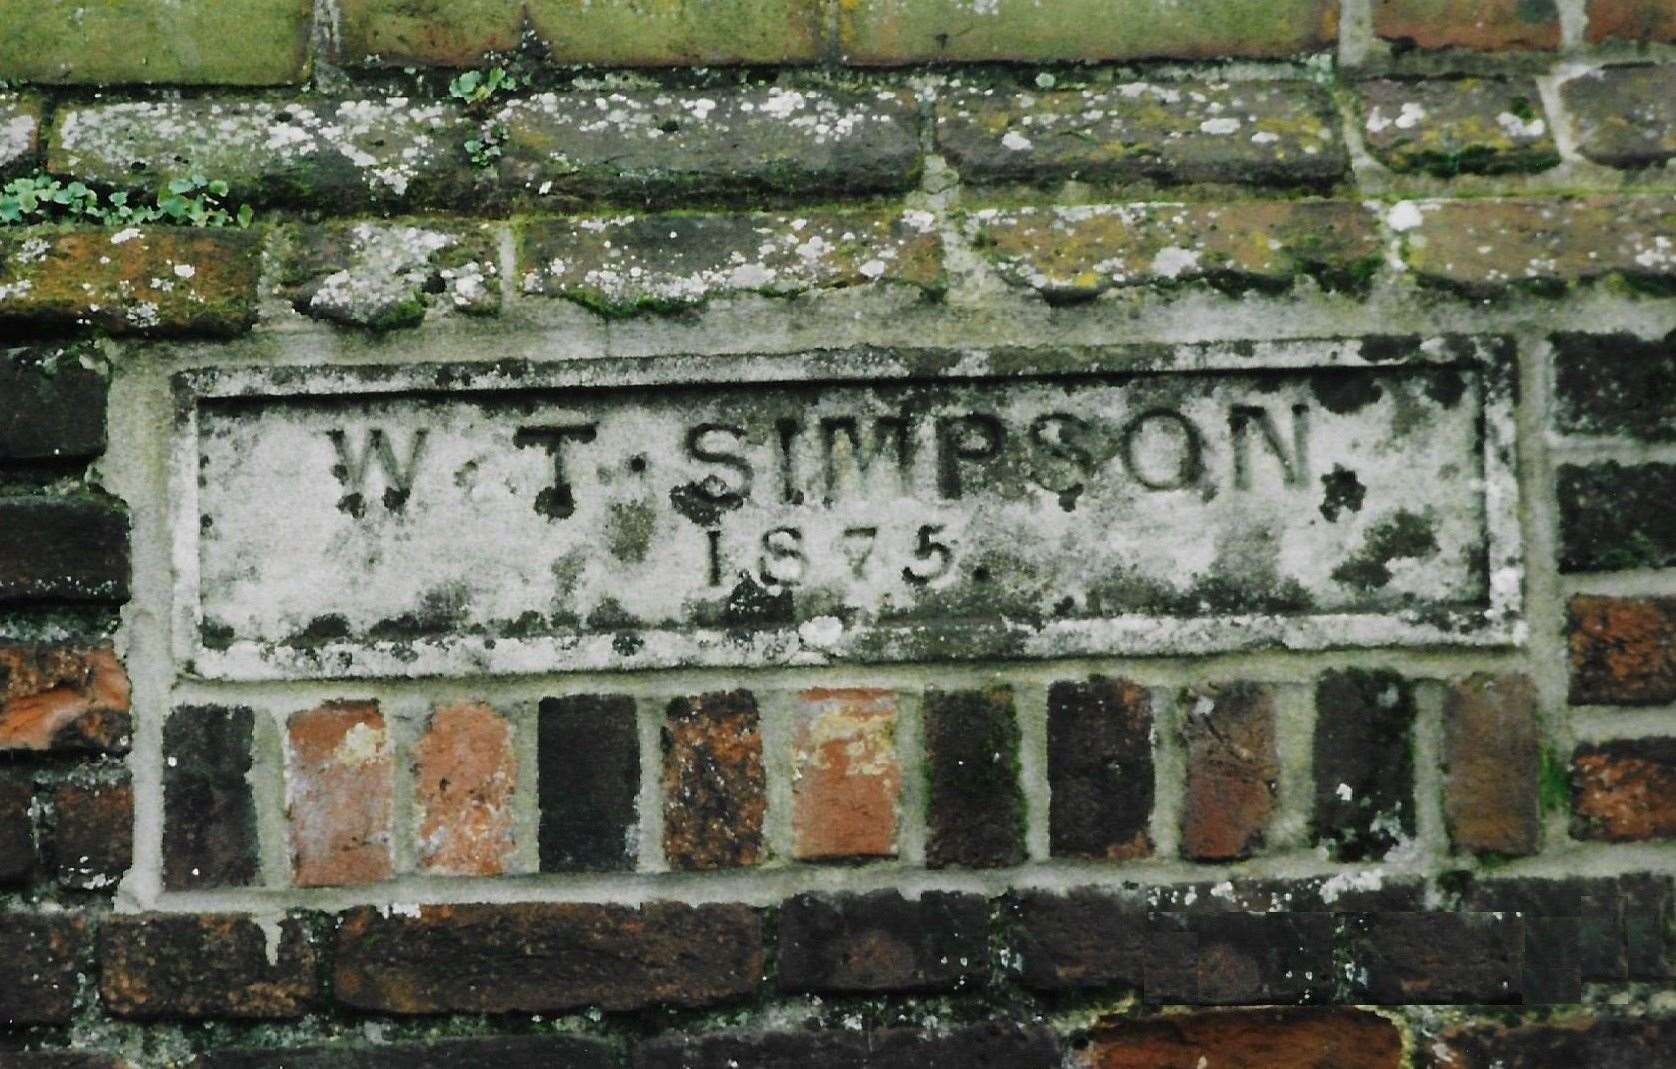 This plaque on a wall in the cattle market, was later moved into the arc